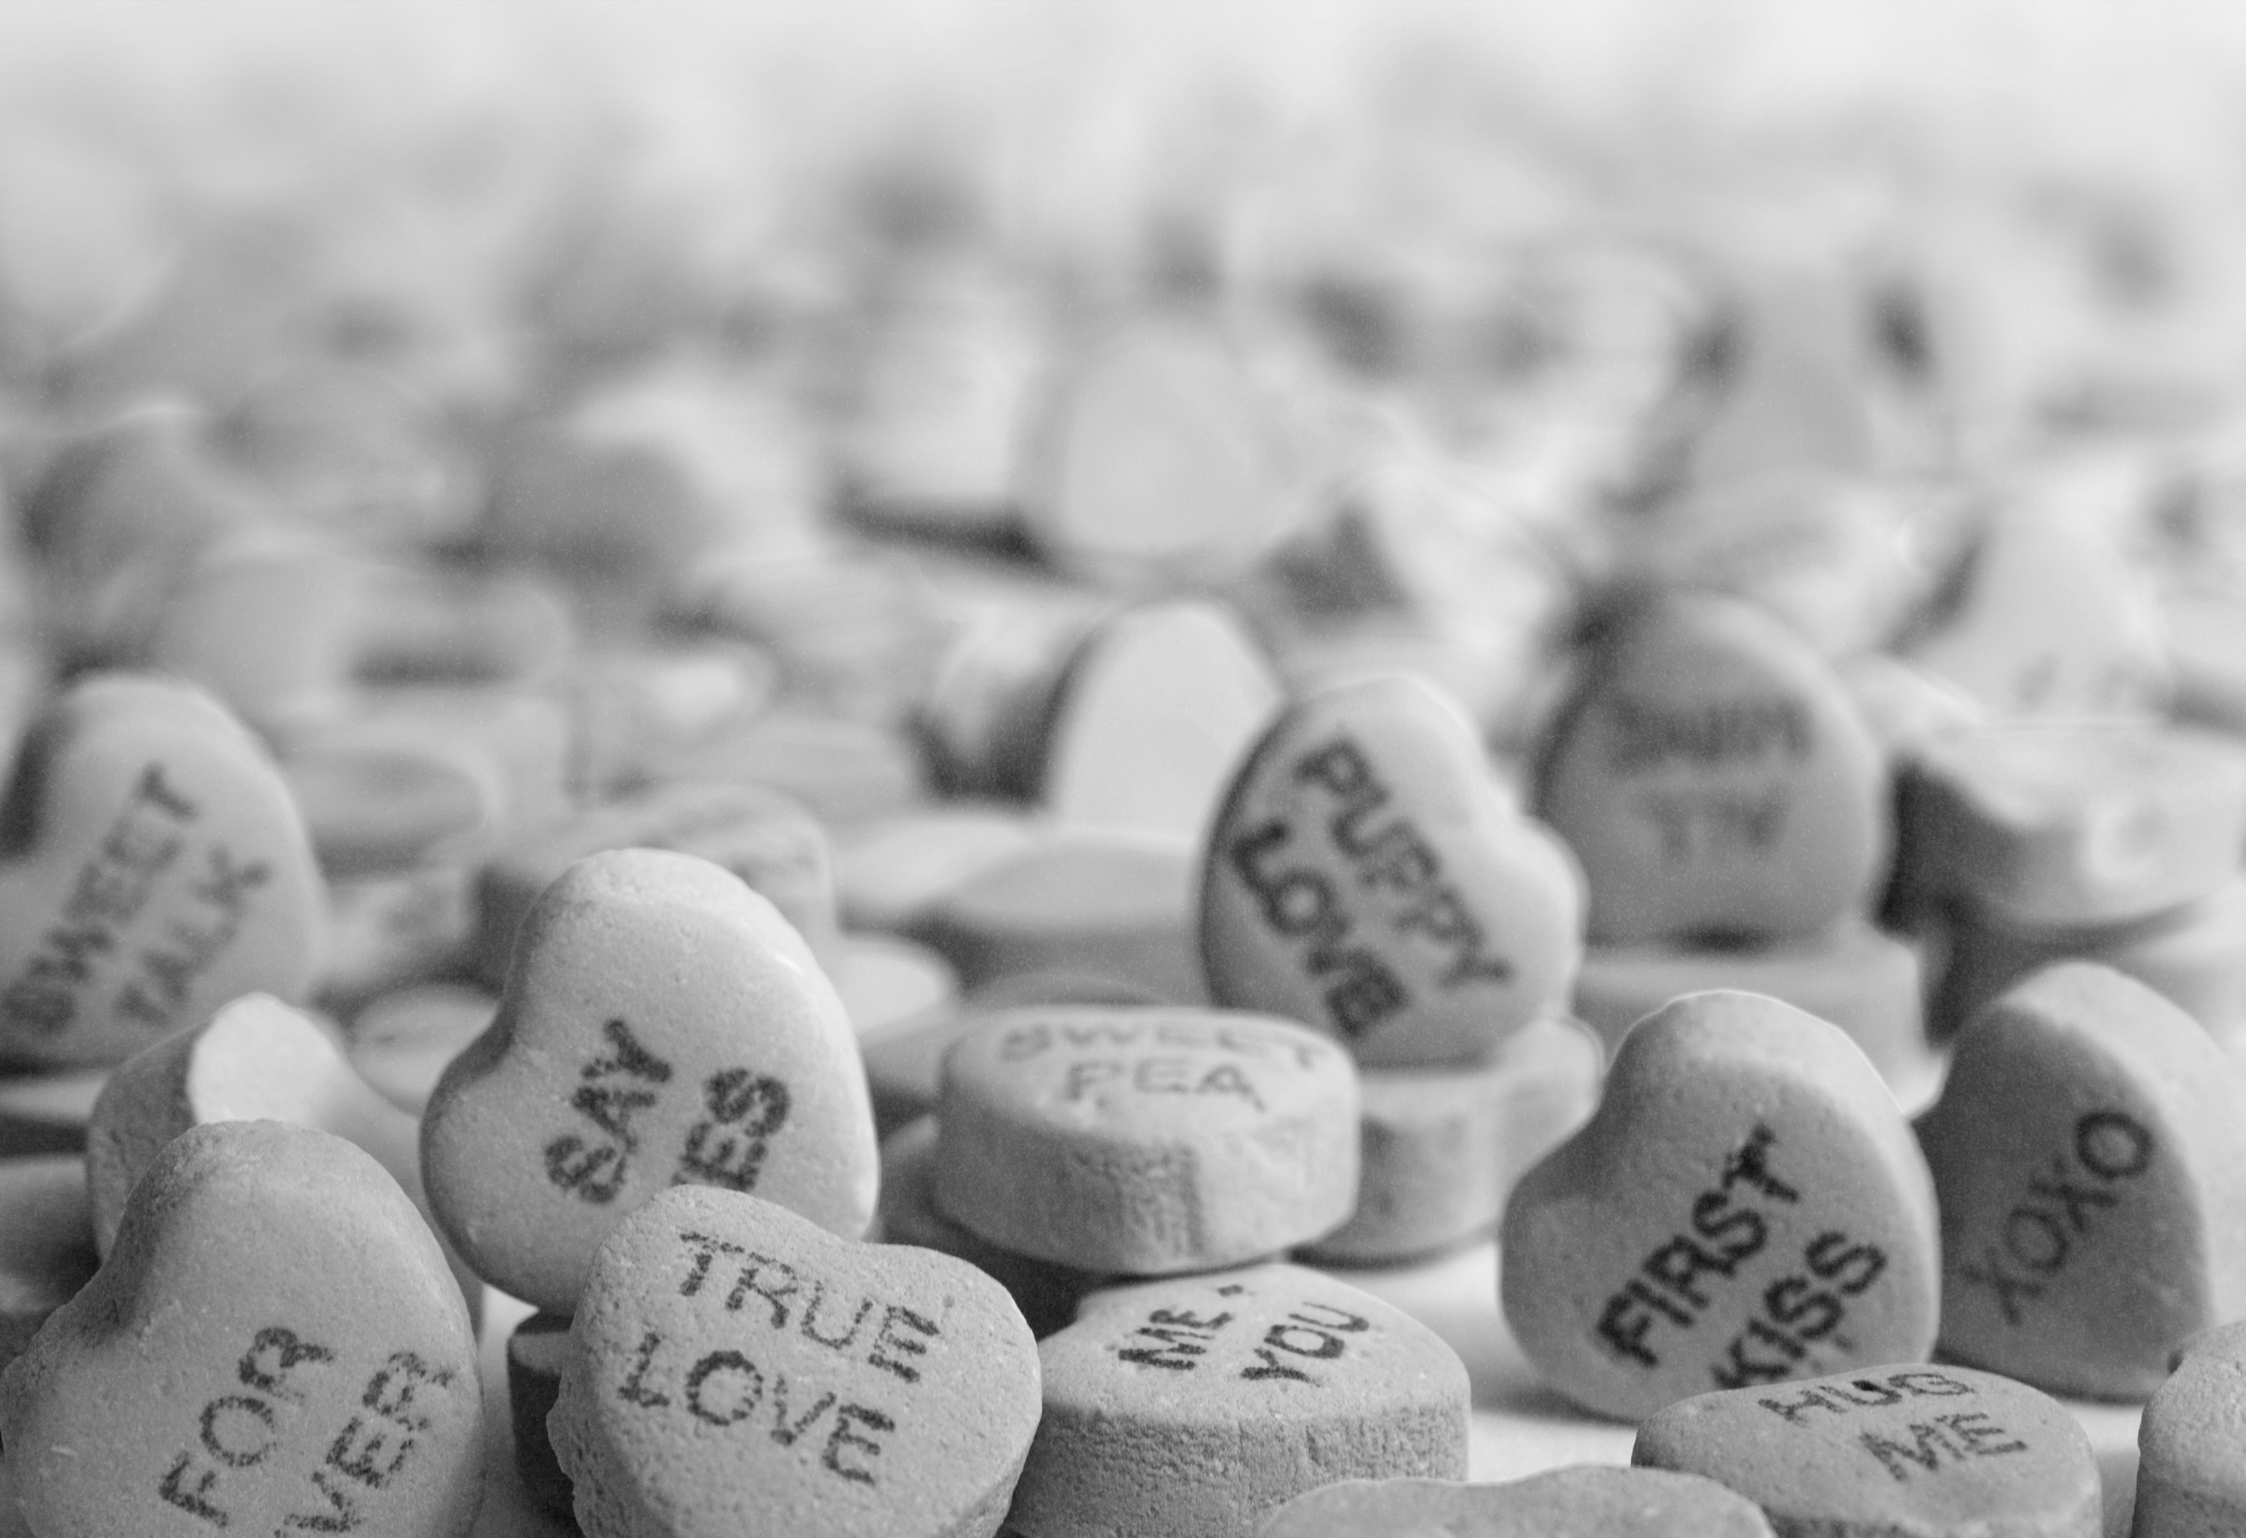 February feels shared between feelings, candy hearts, and guilty pleasures